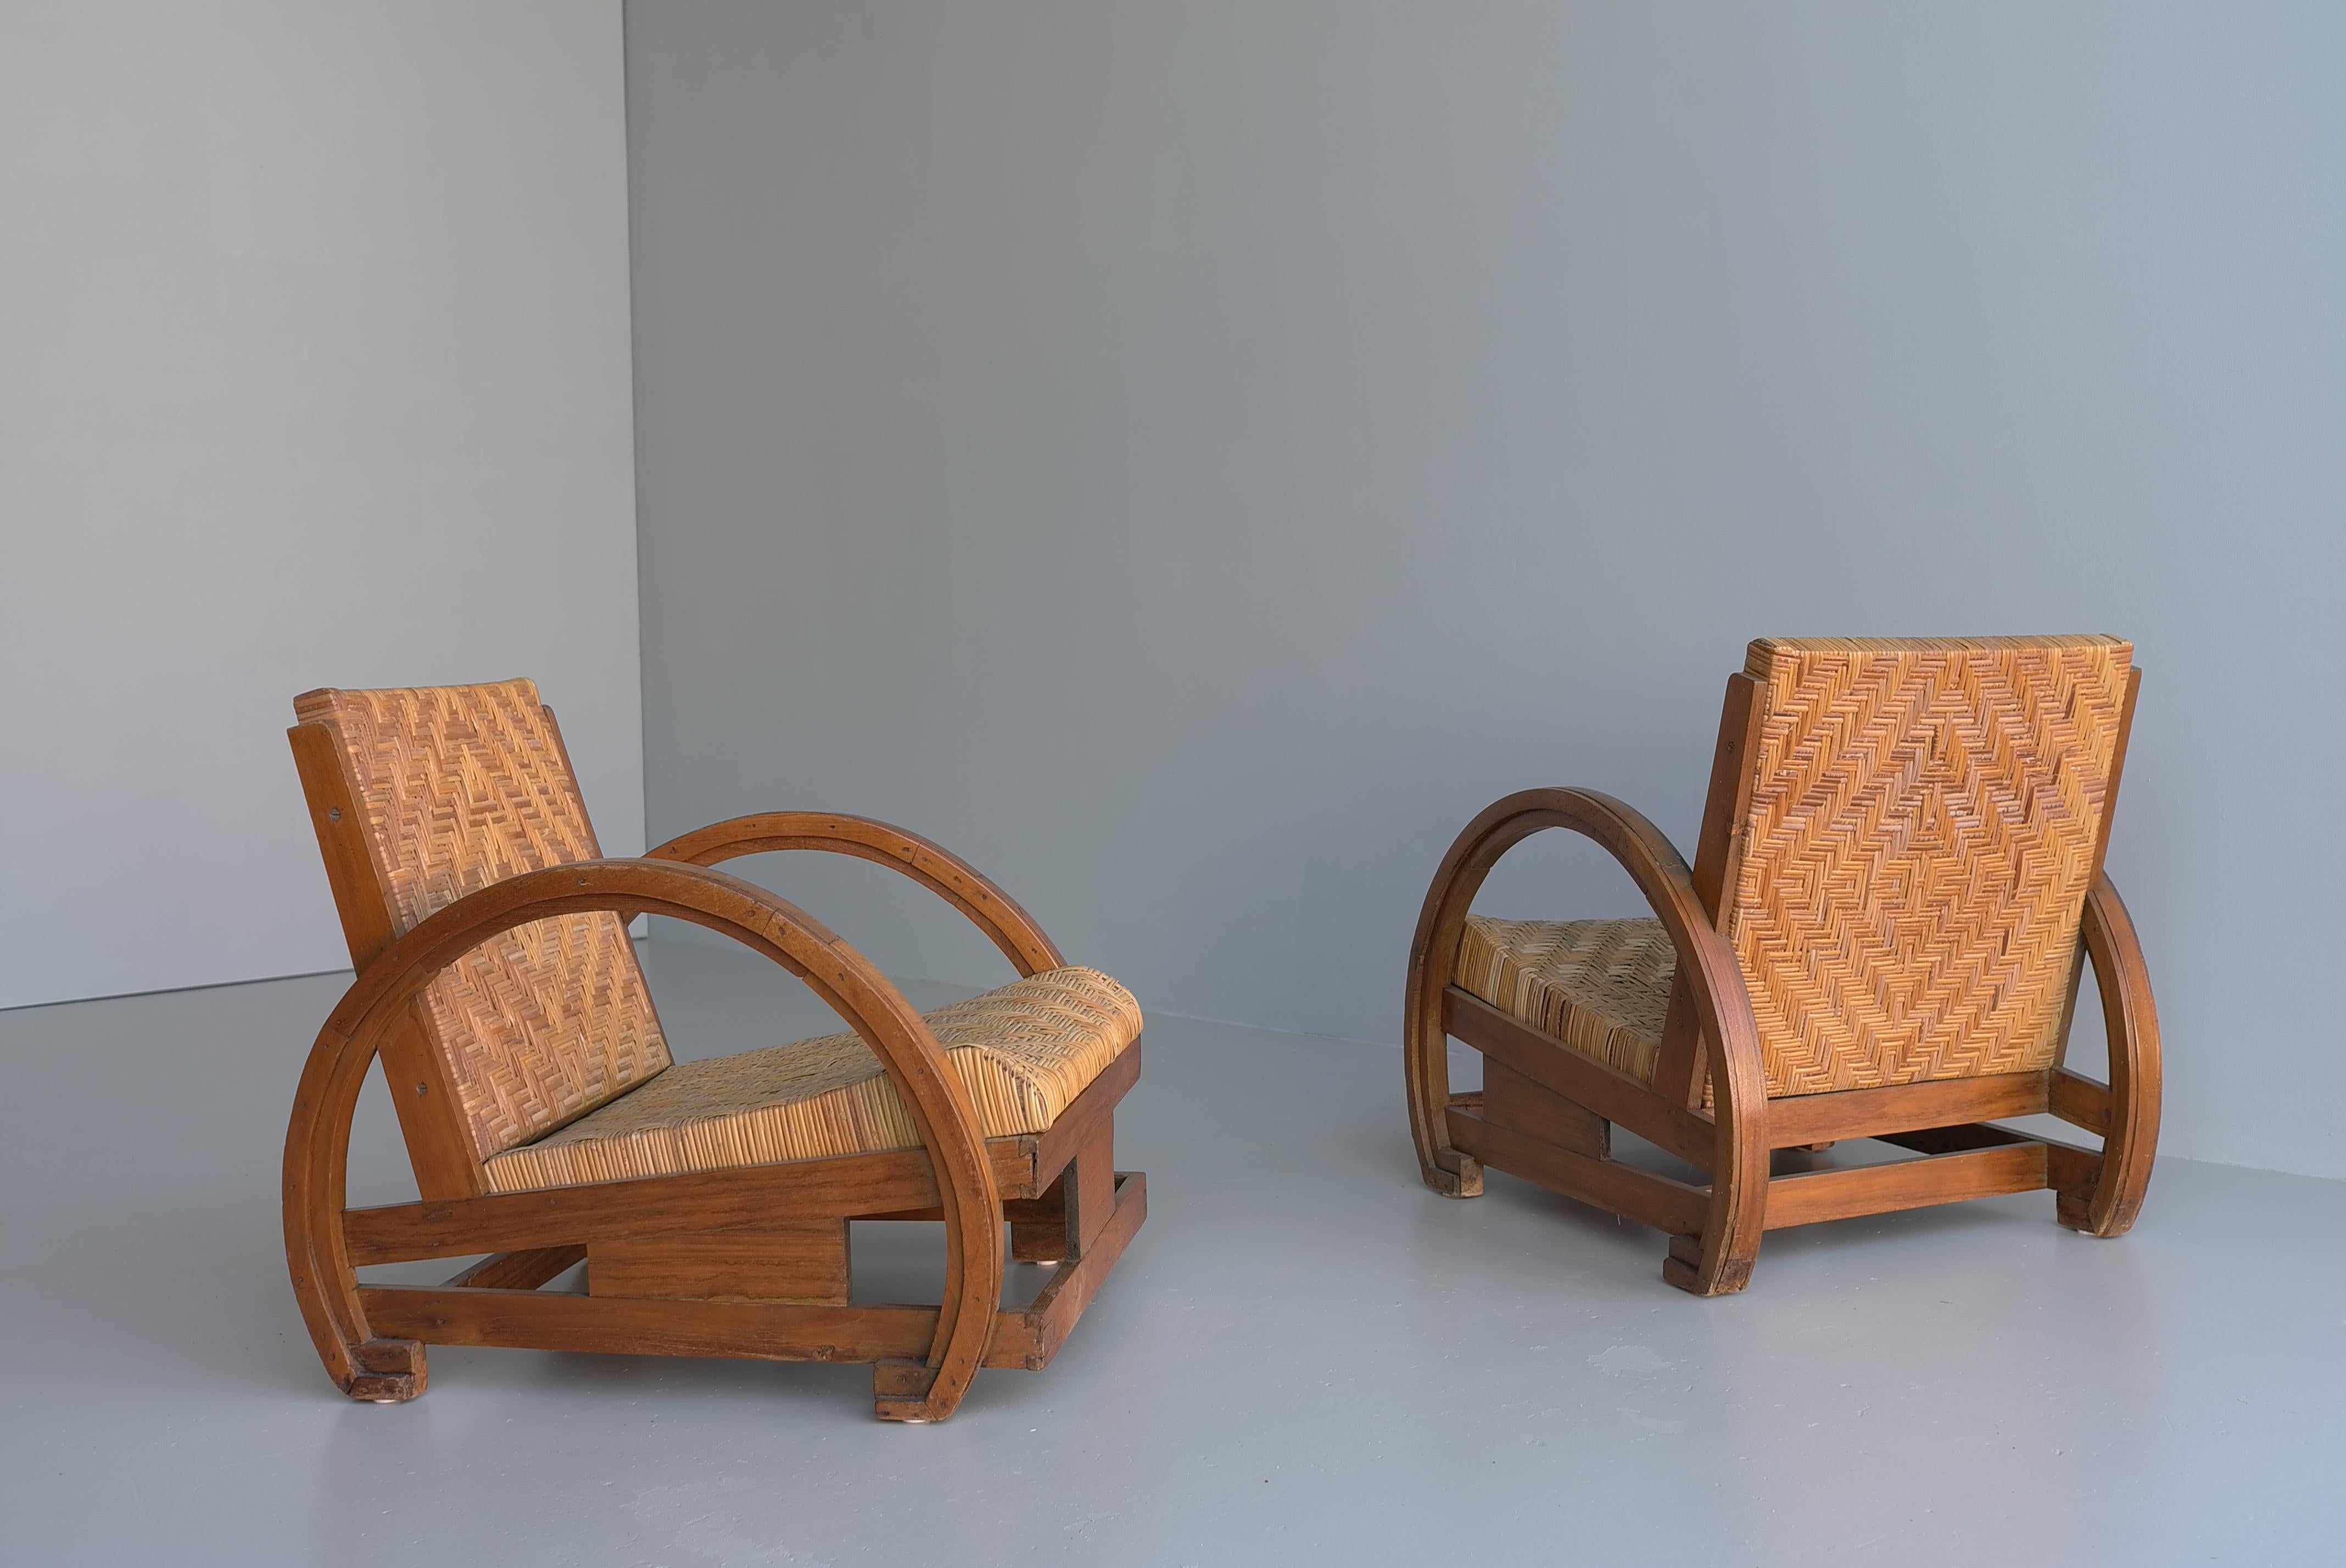 Pair Of Sculptural Art Deco Armchairs in Wood with rush seats 1930's